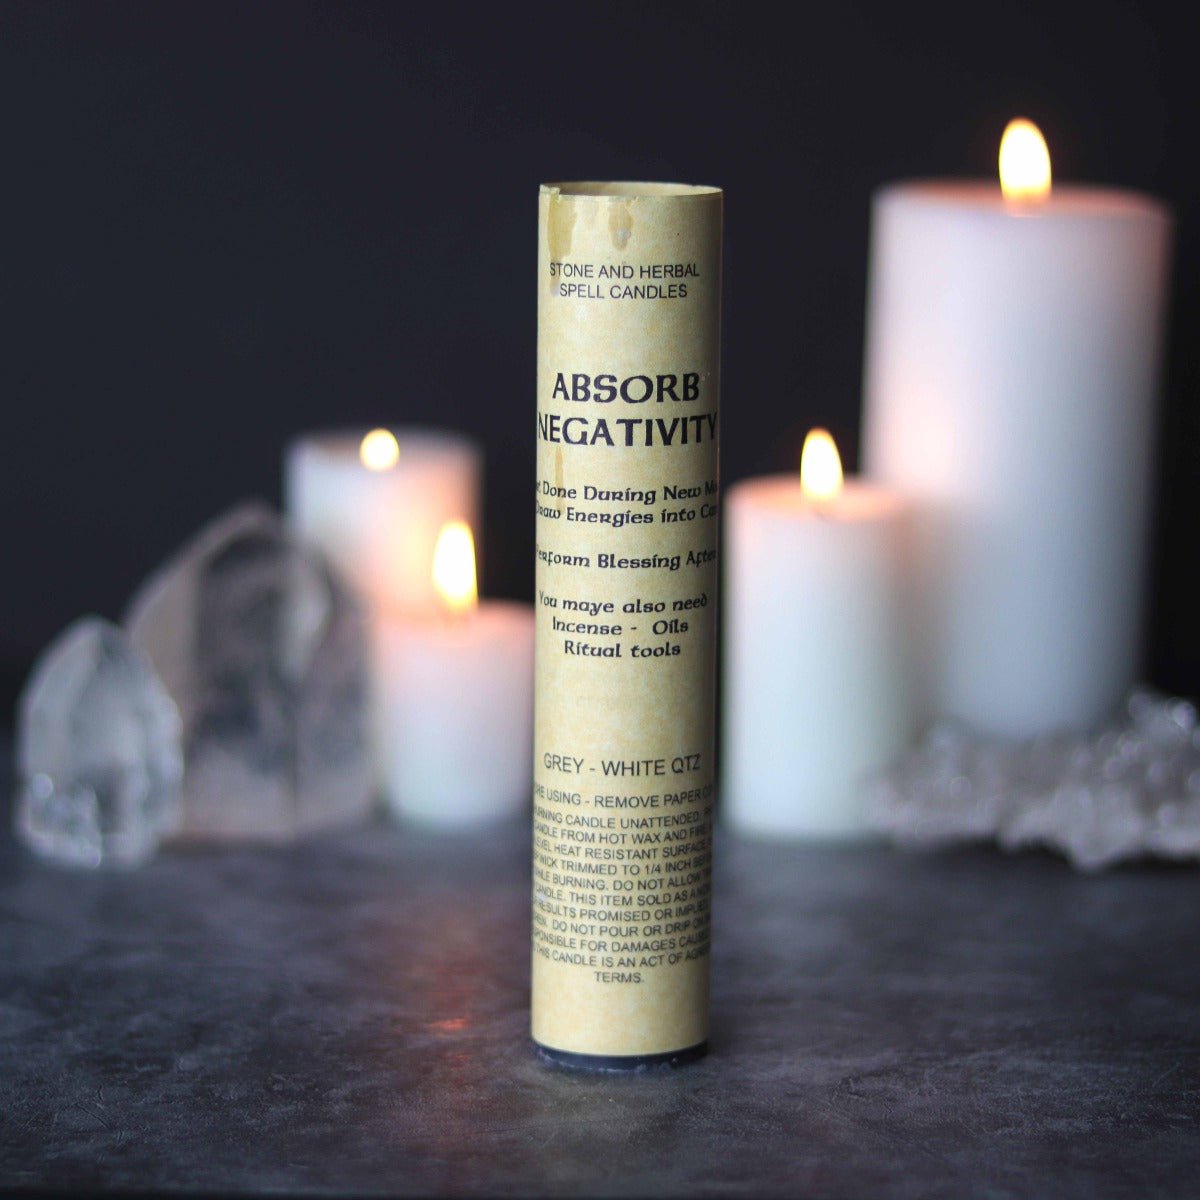 Absorb Negativity Spell Candle - 13 Moons